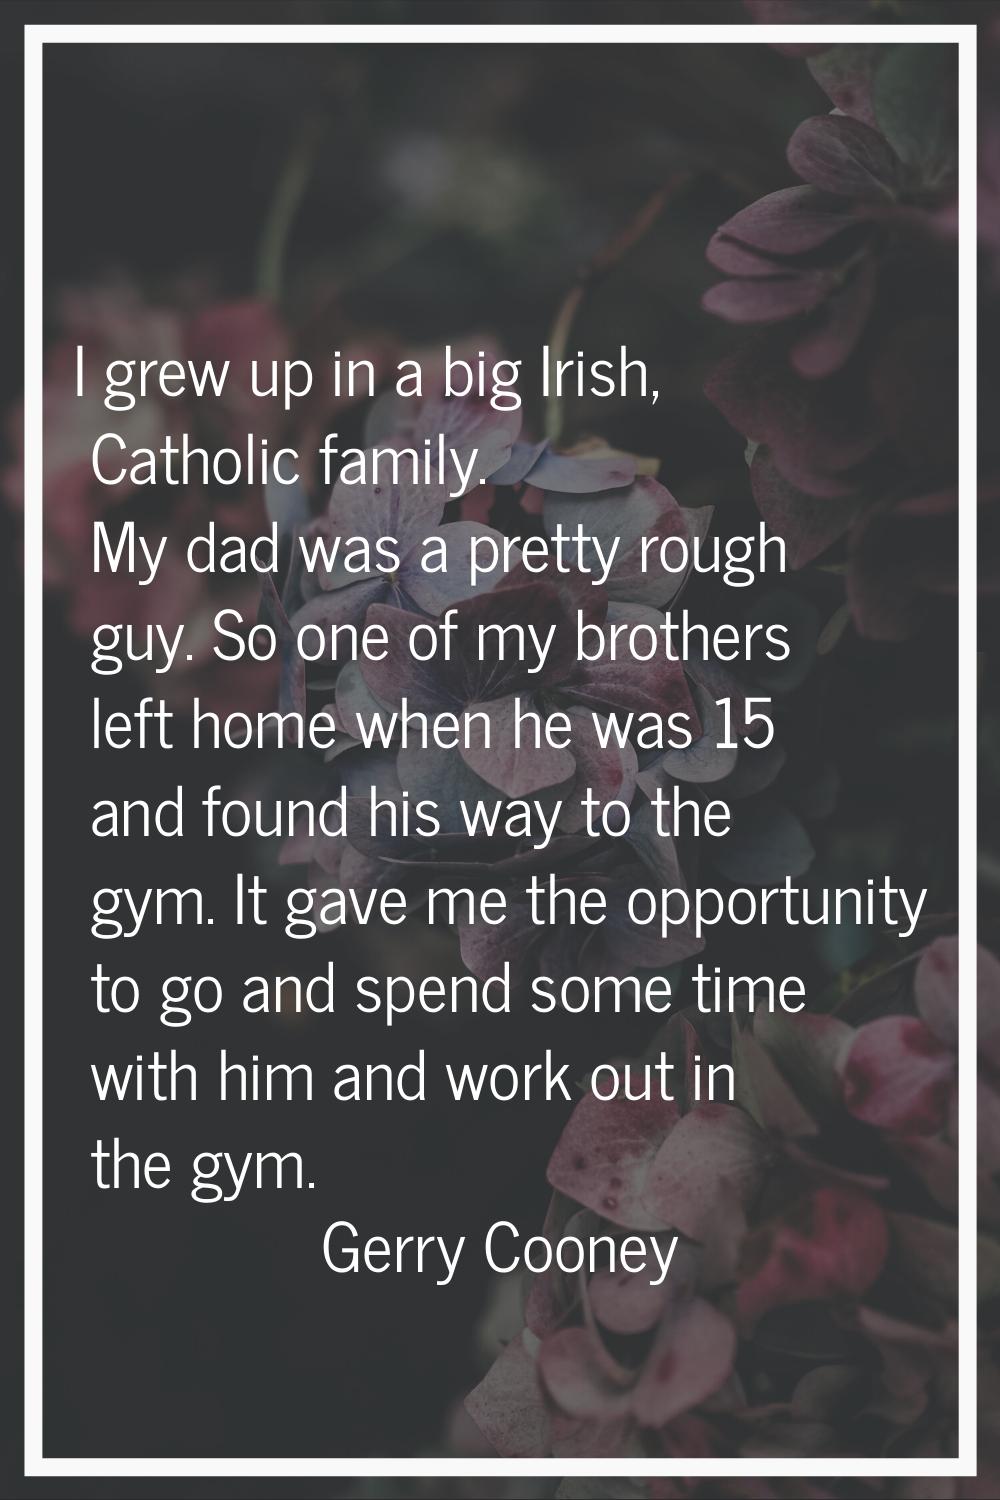 I grew up in a big Irish, Catholic family. My dad was a pretty rough guy. So one of my brothers lef